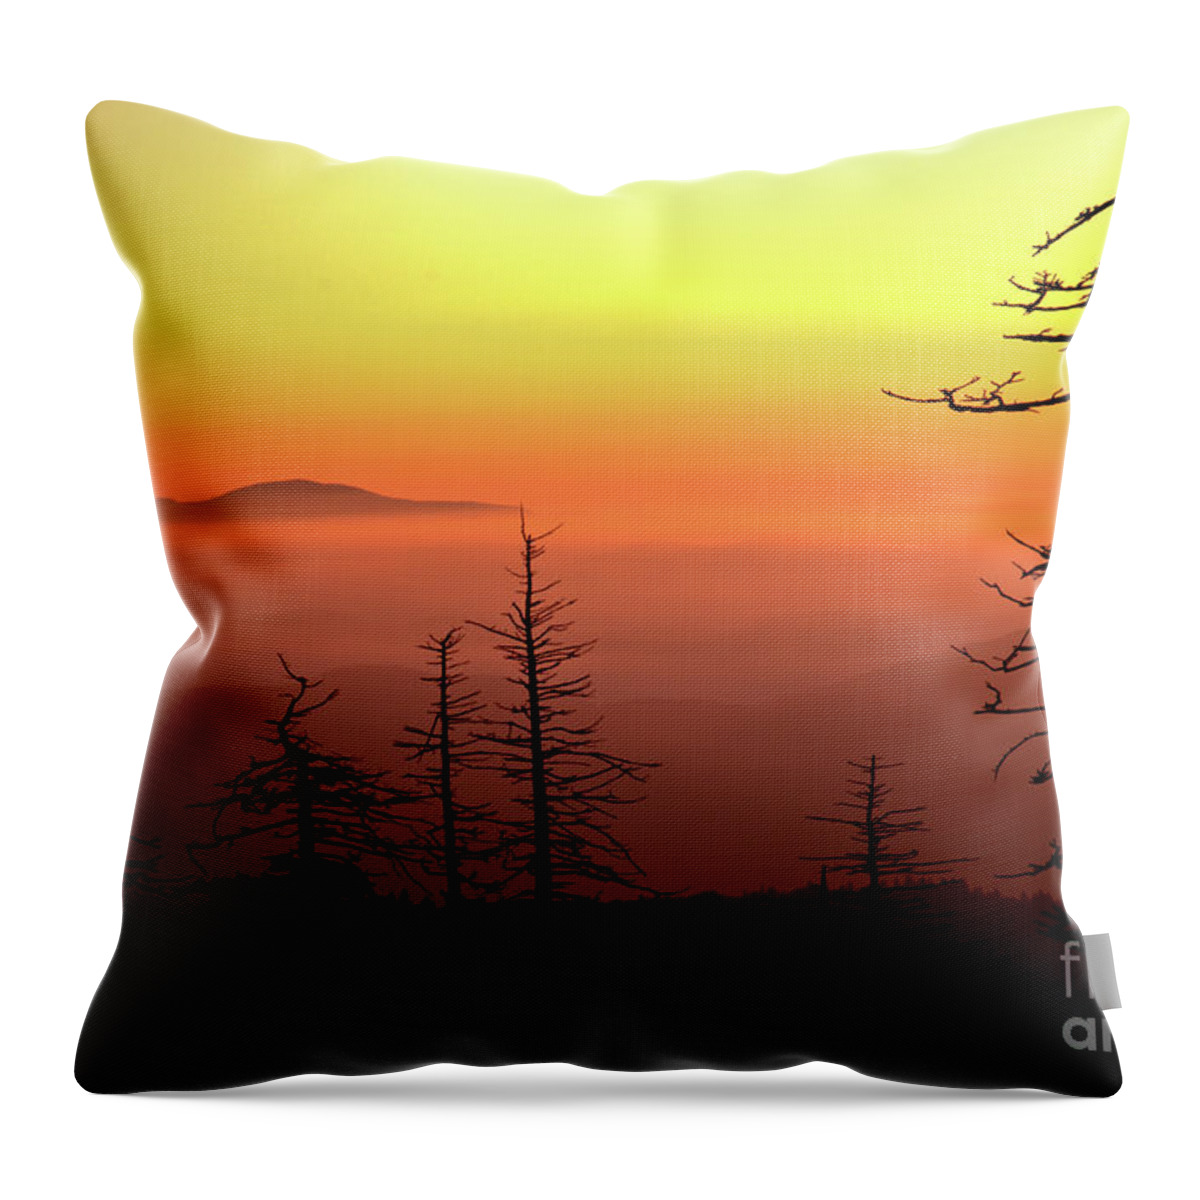 Sunrise Throw Pillow featuring the photograph Candy Corn Sunrise by Douglas Stucky